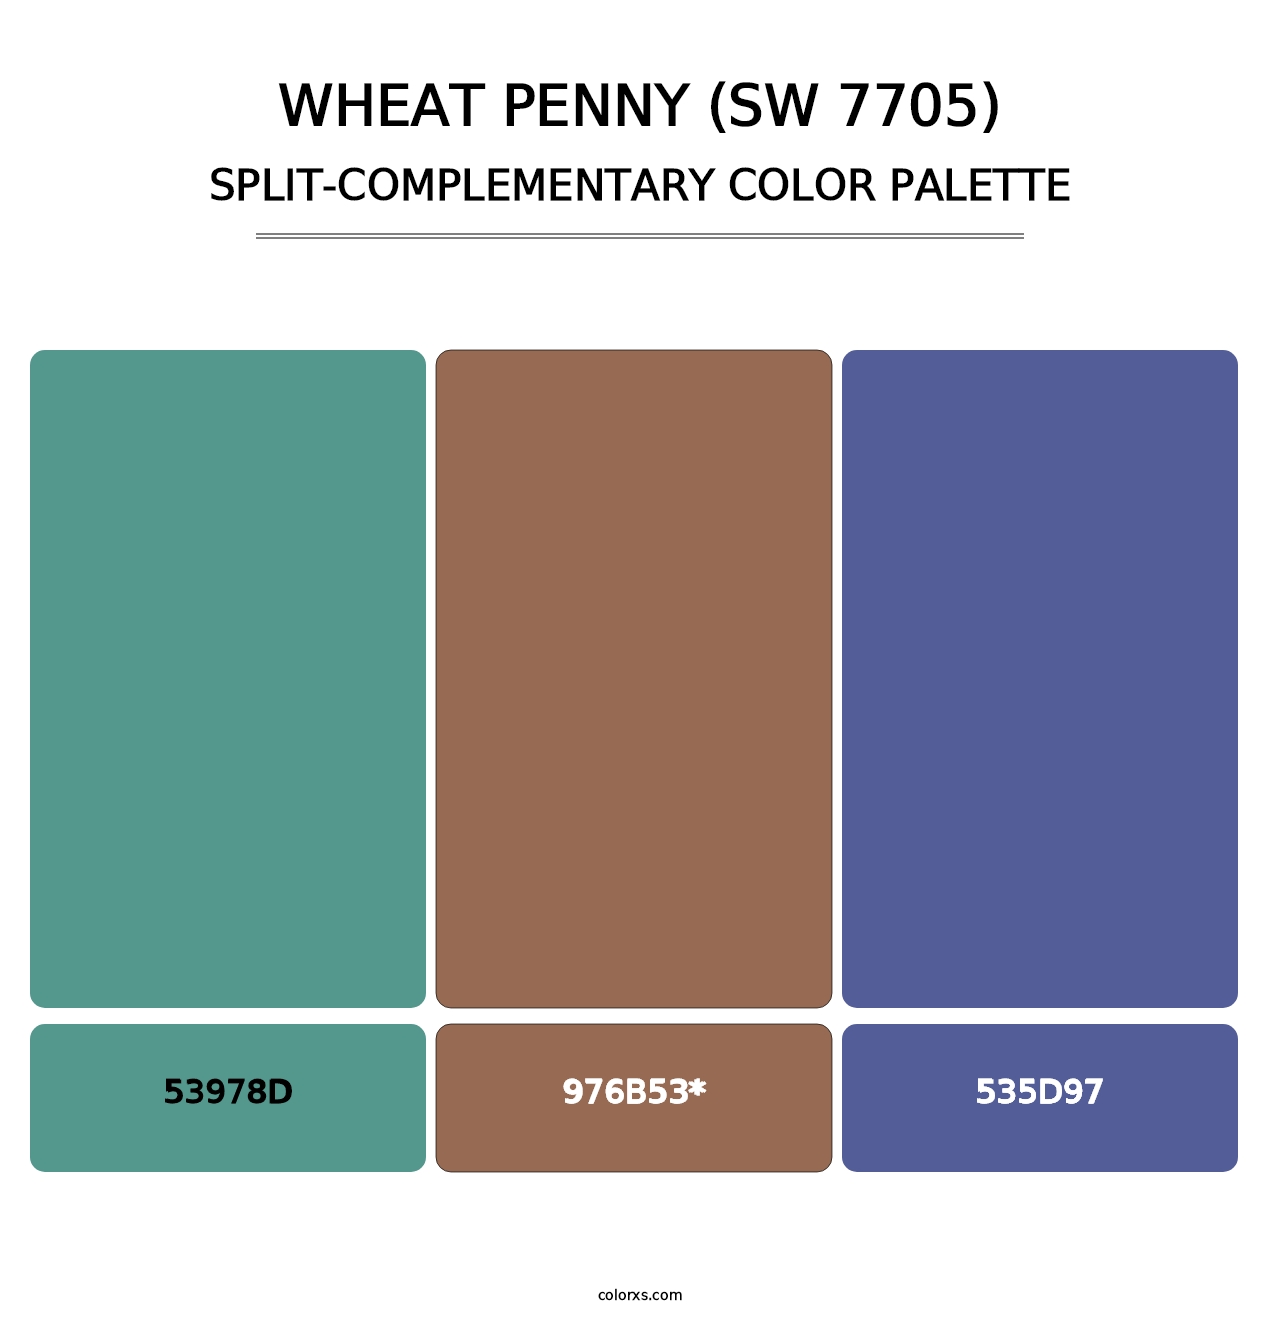 Wheat Penny (SW 7705) - Split-Complementary Color Palette